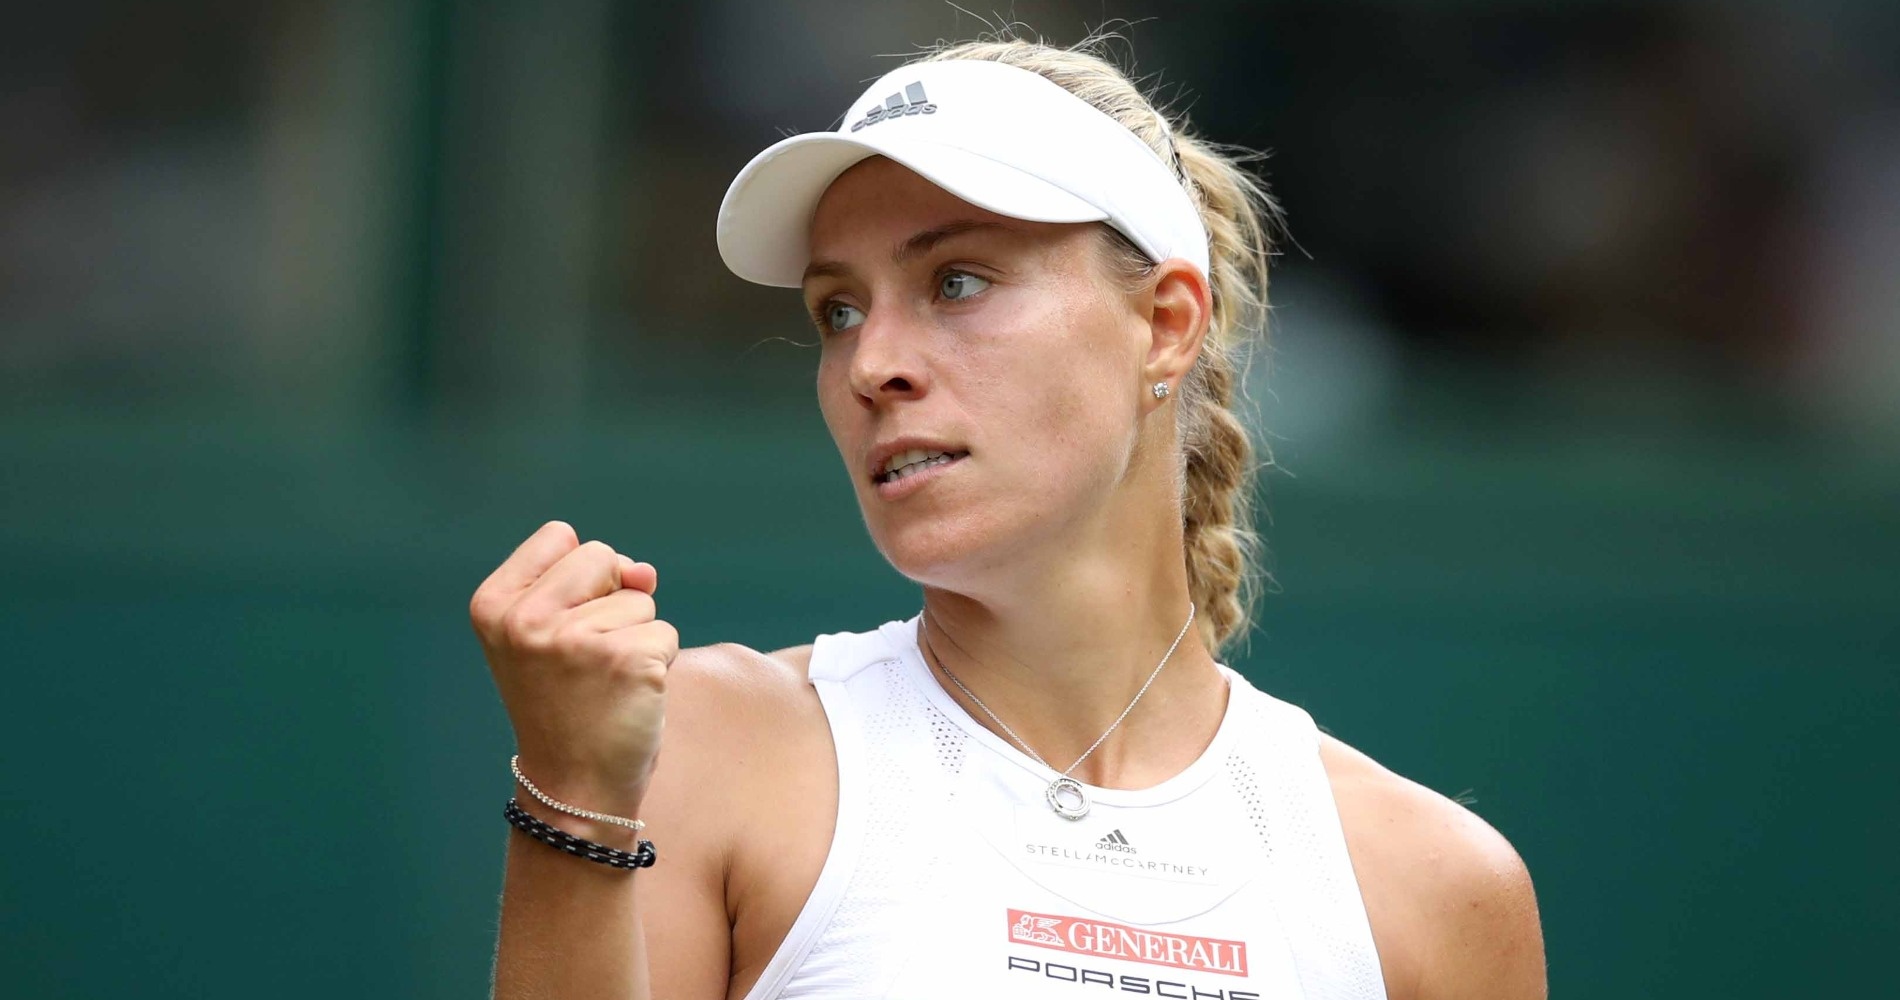 2018 Wimbledon champion Angelique Kerber is back in the second week